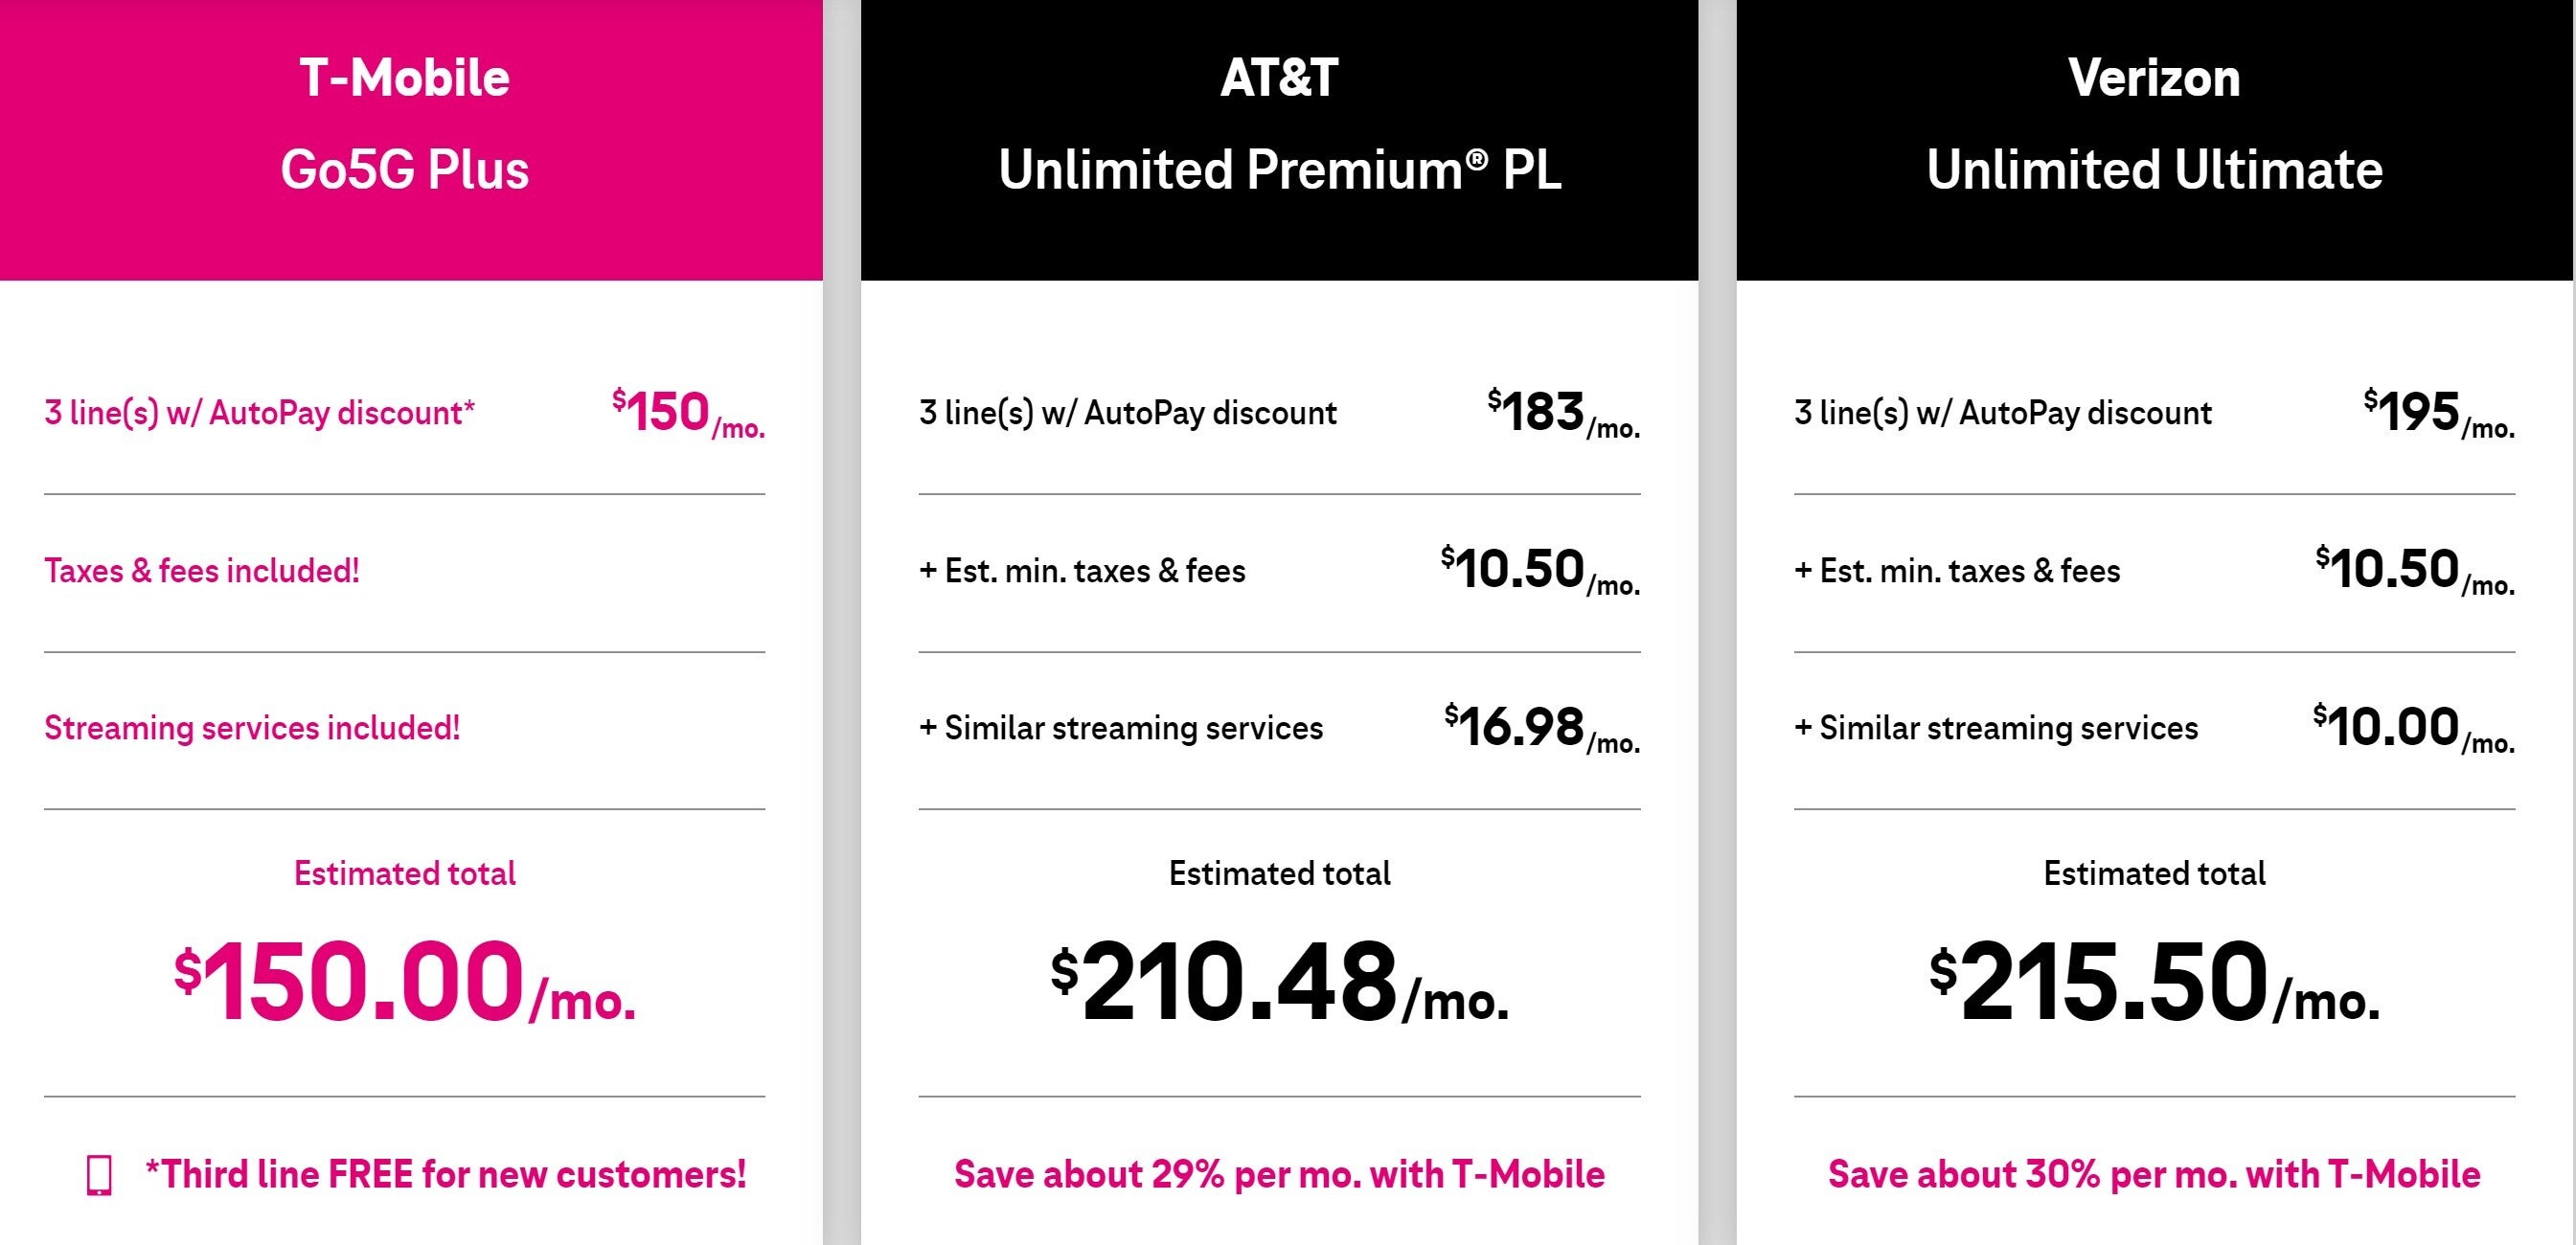 T-Mobile touts its Un-carrier assets - T-Mobile's clever way of charging extra fees while still remaining an Un-carrier